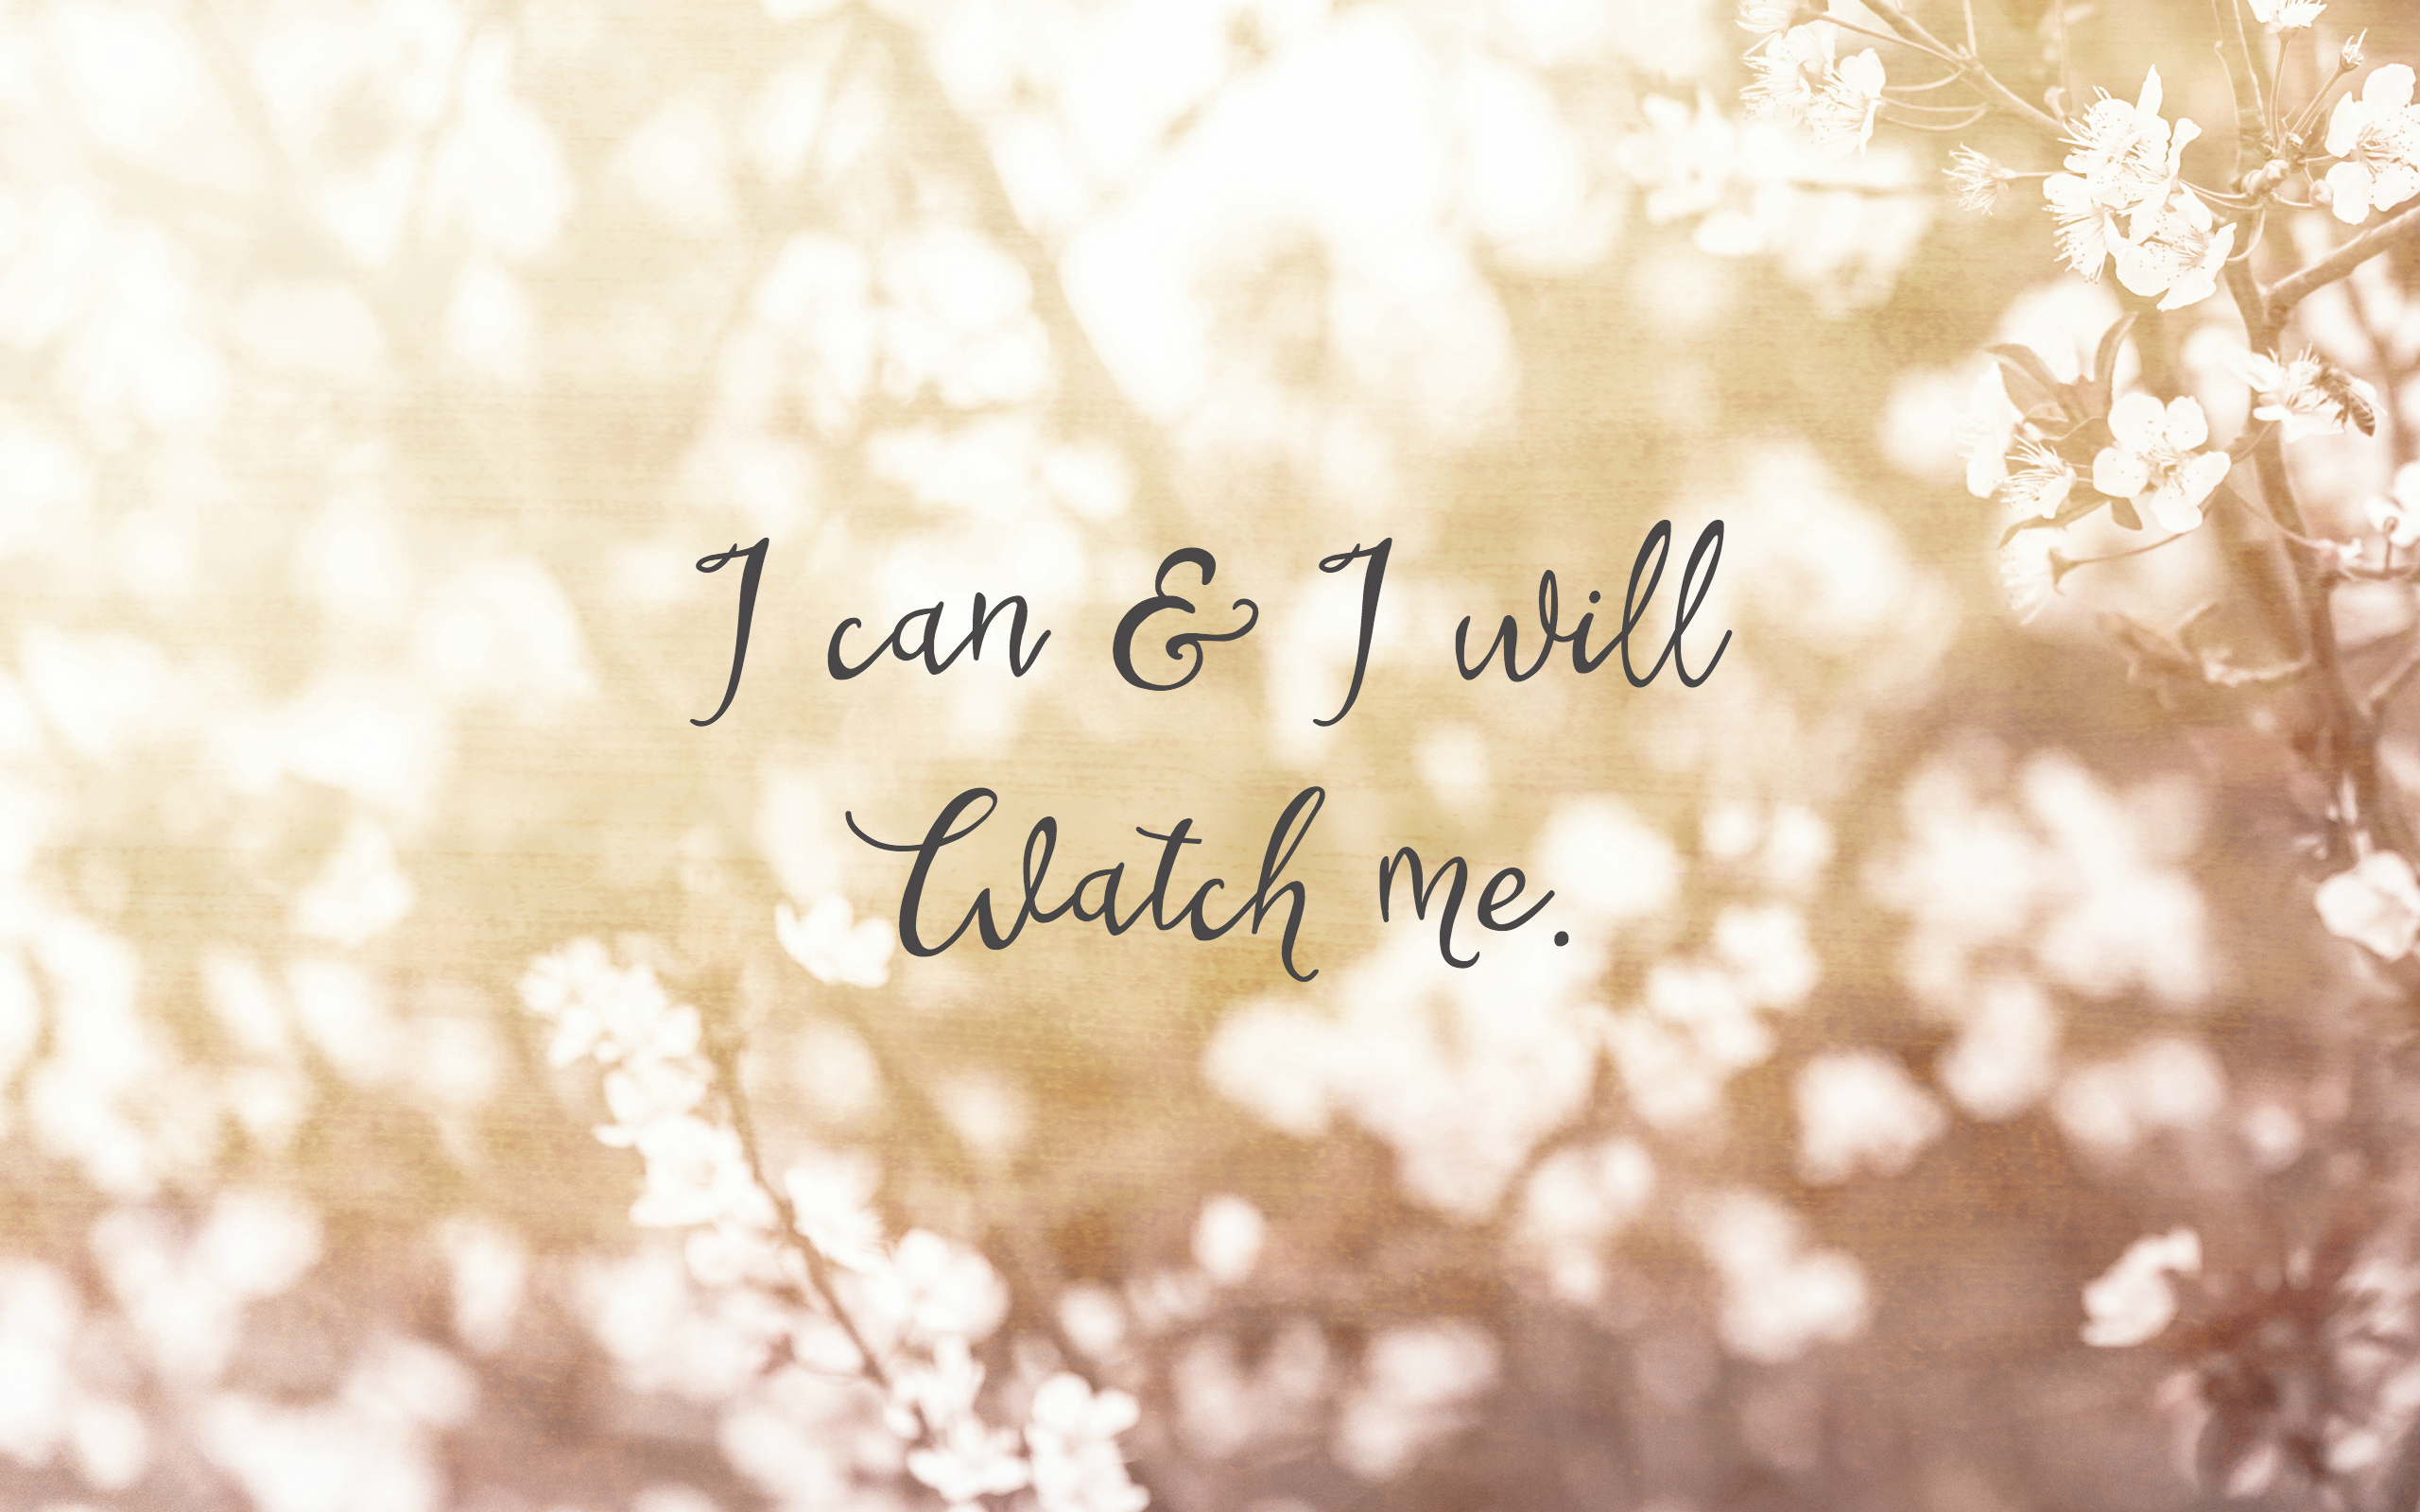 Desktop Wallpaper Quotes I Can And I Will Watch Me - 2560x1600 Wallpaper -  